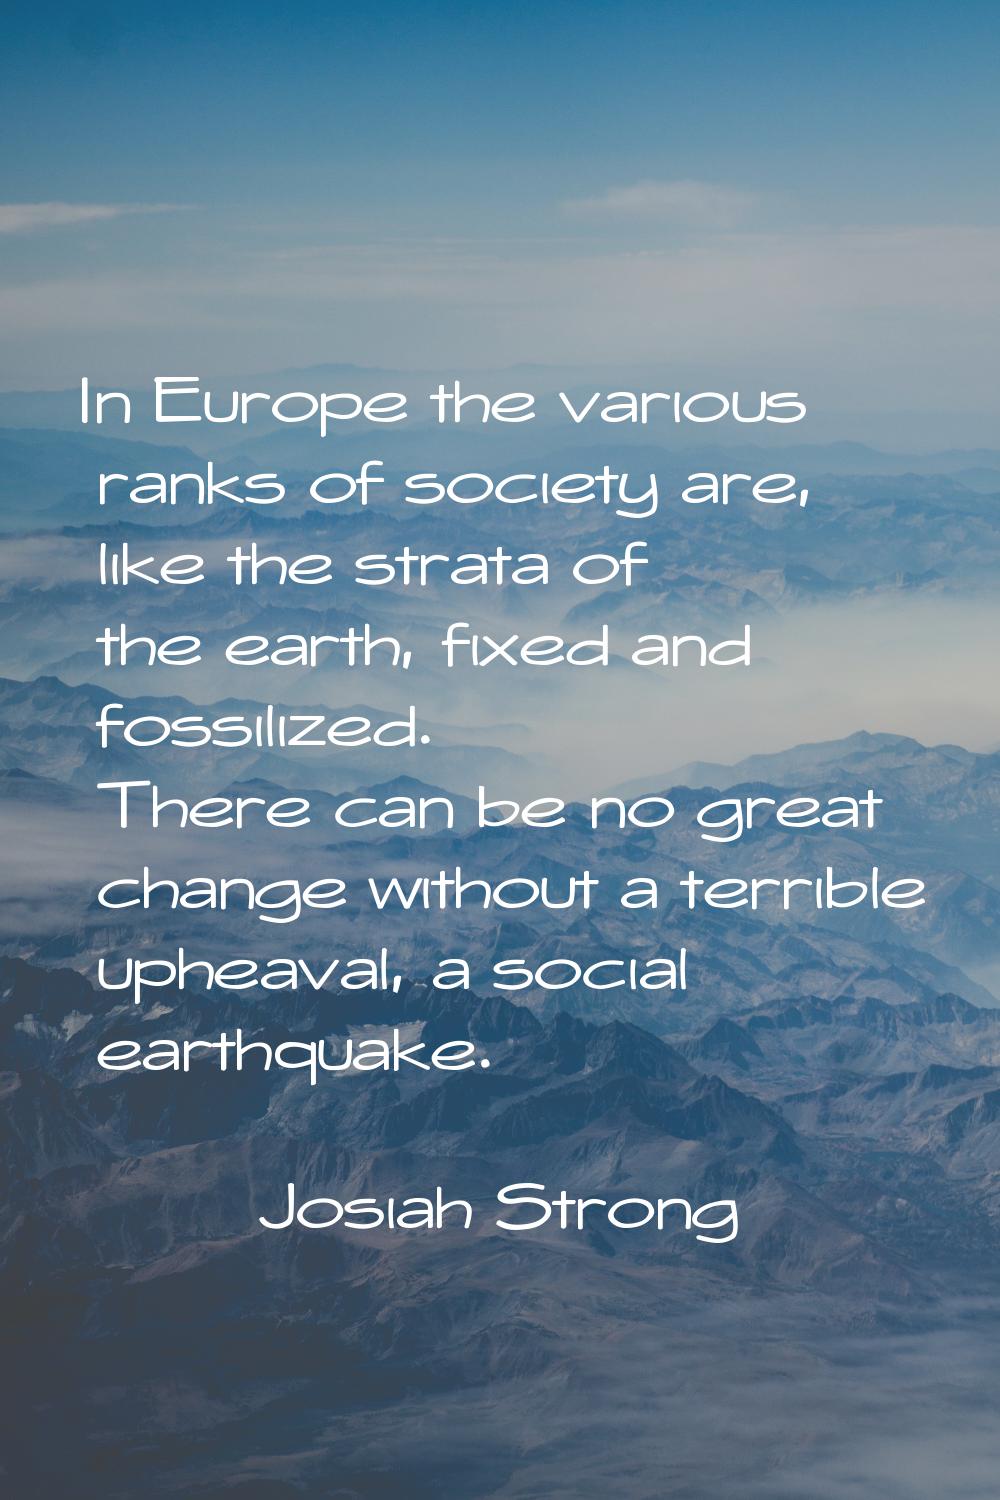 In Europe the various ranks of society are, like the strata of the earth, fixed and fossilized. The